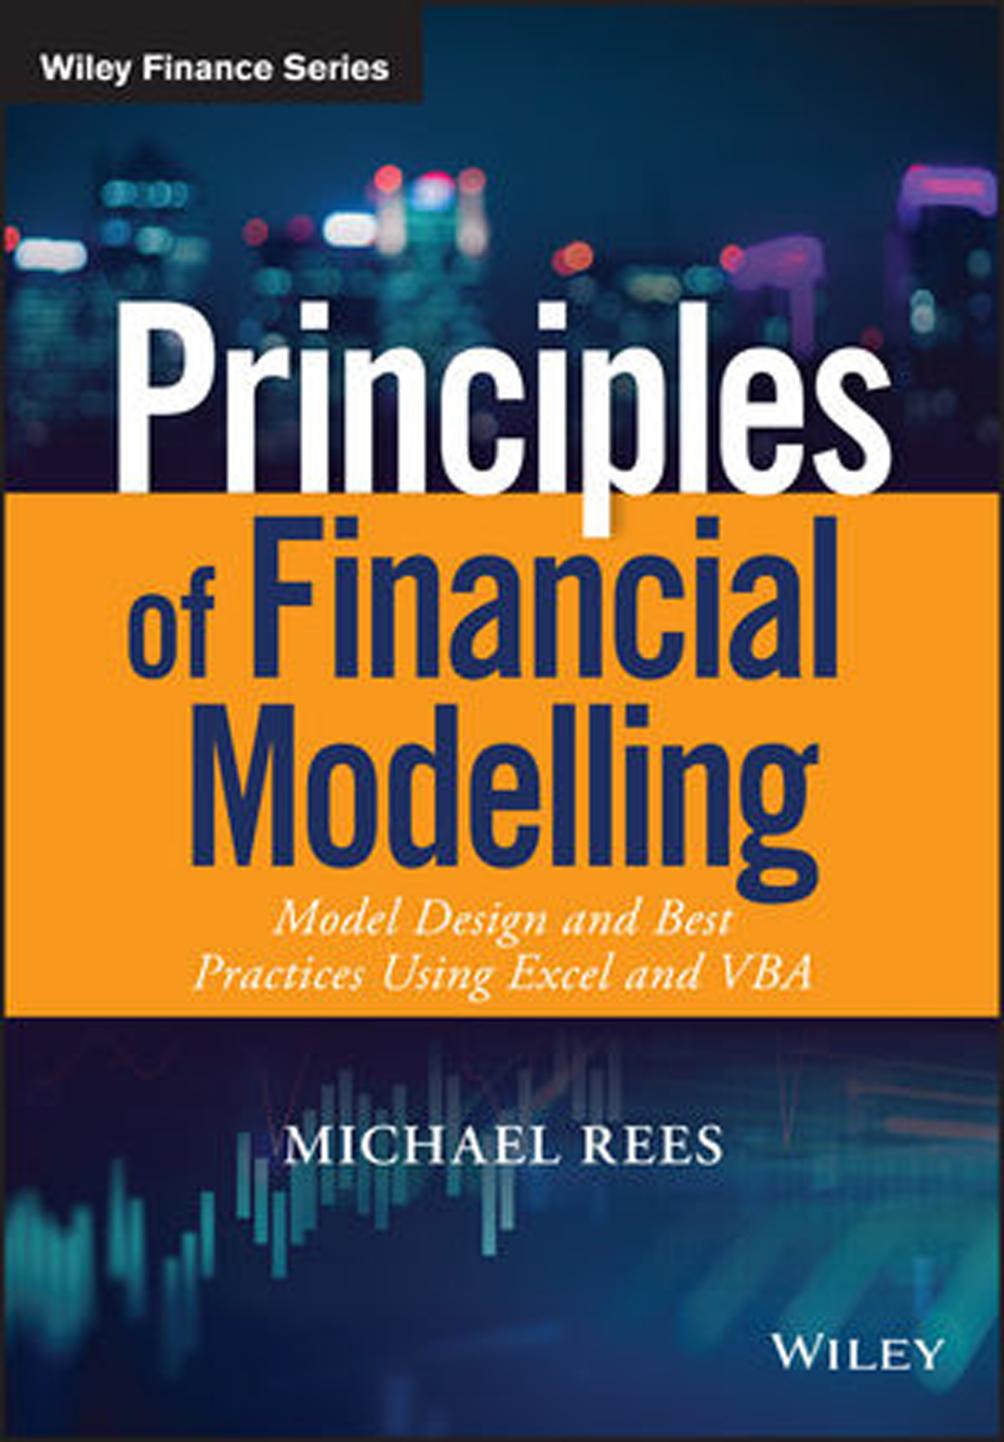 Principles of Financial Modelling Model Design and Best Practices Using Excel and VBA 2018